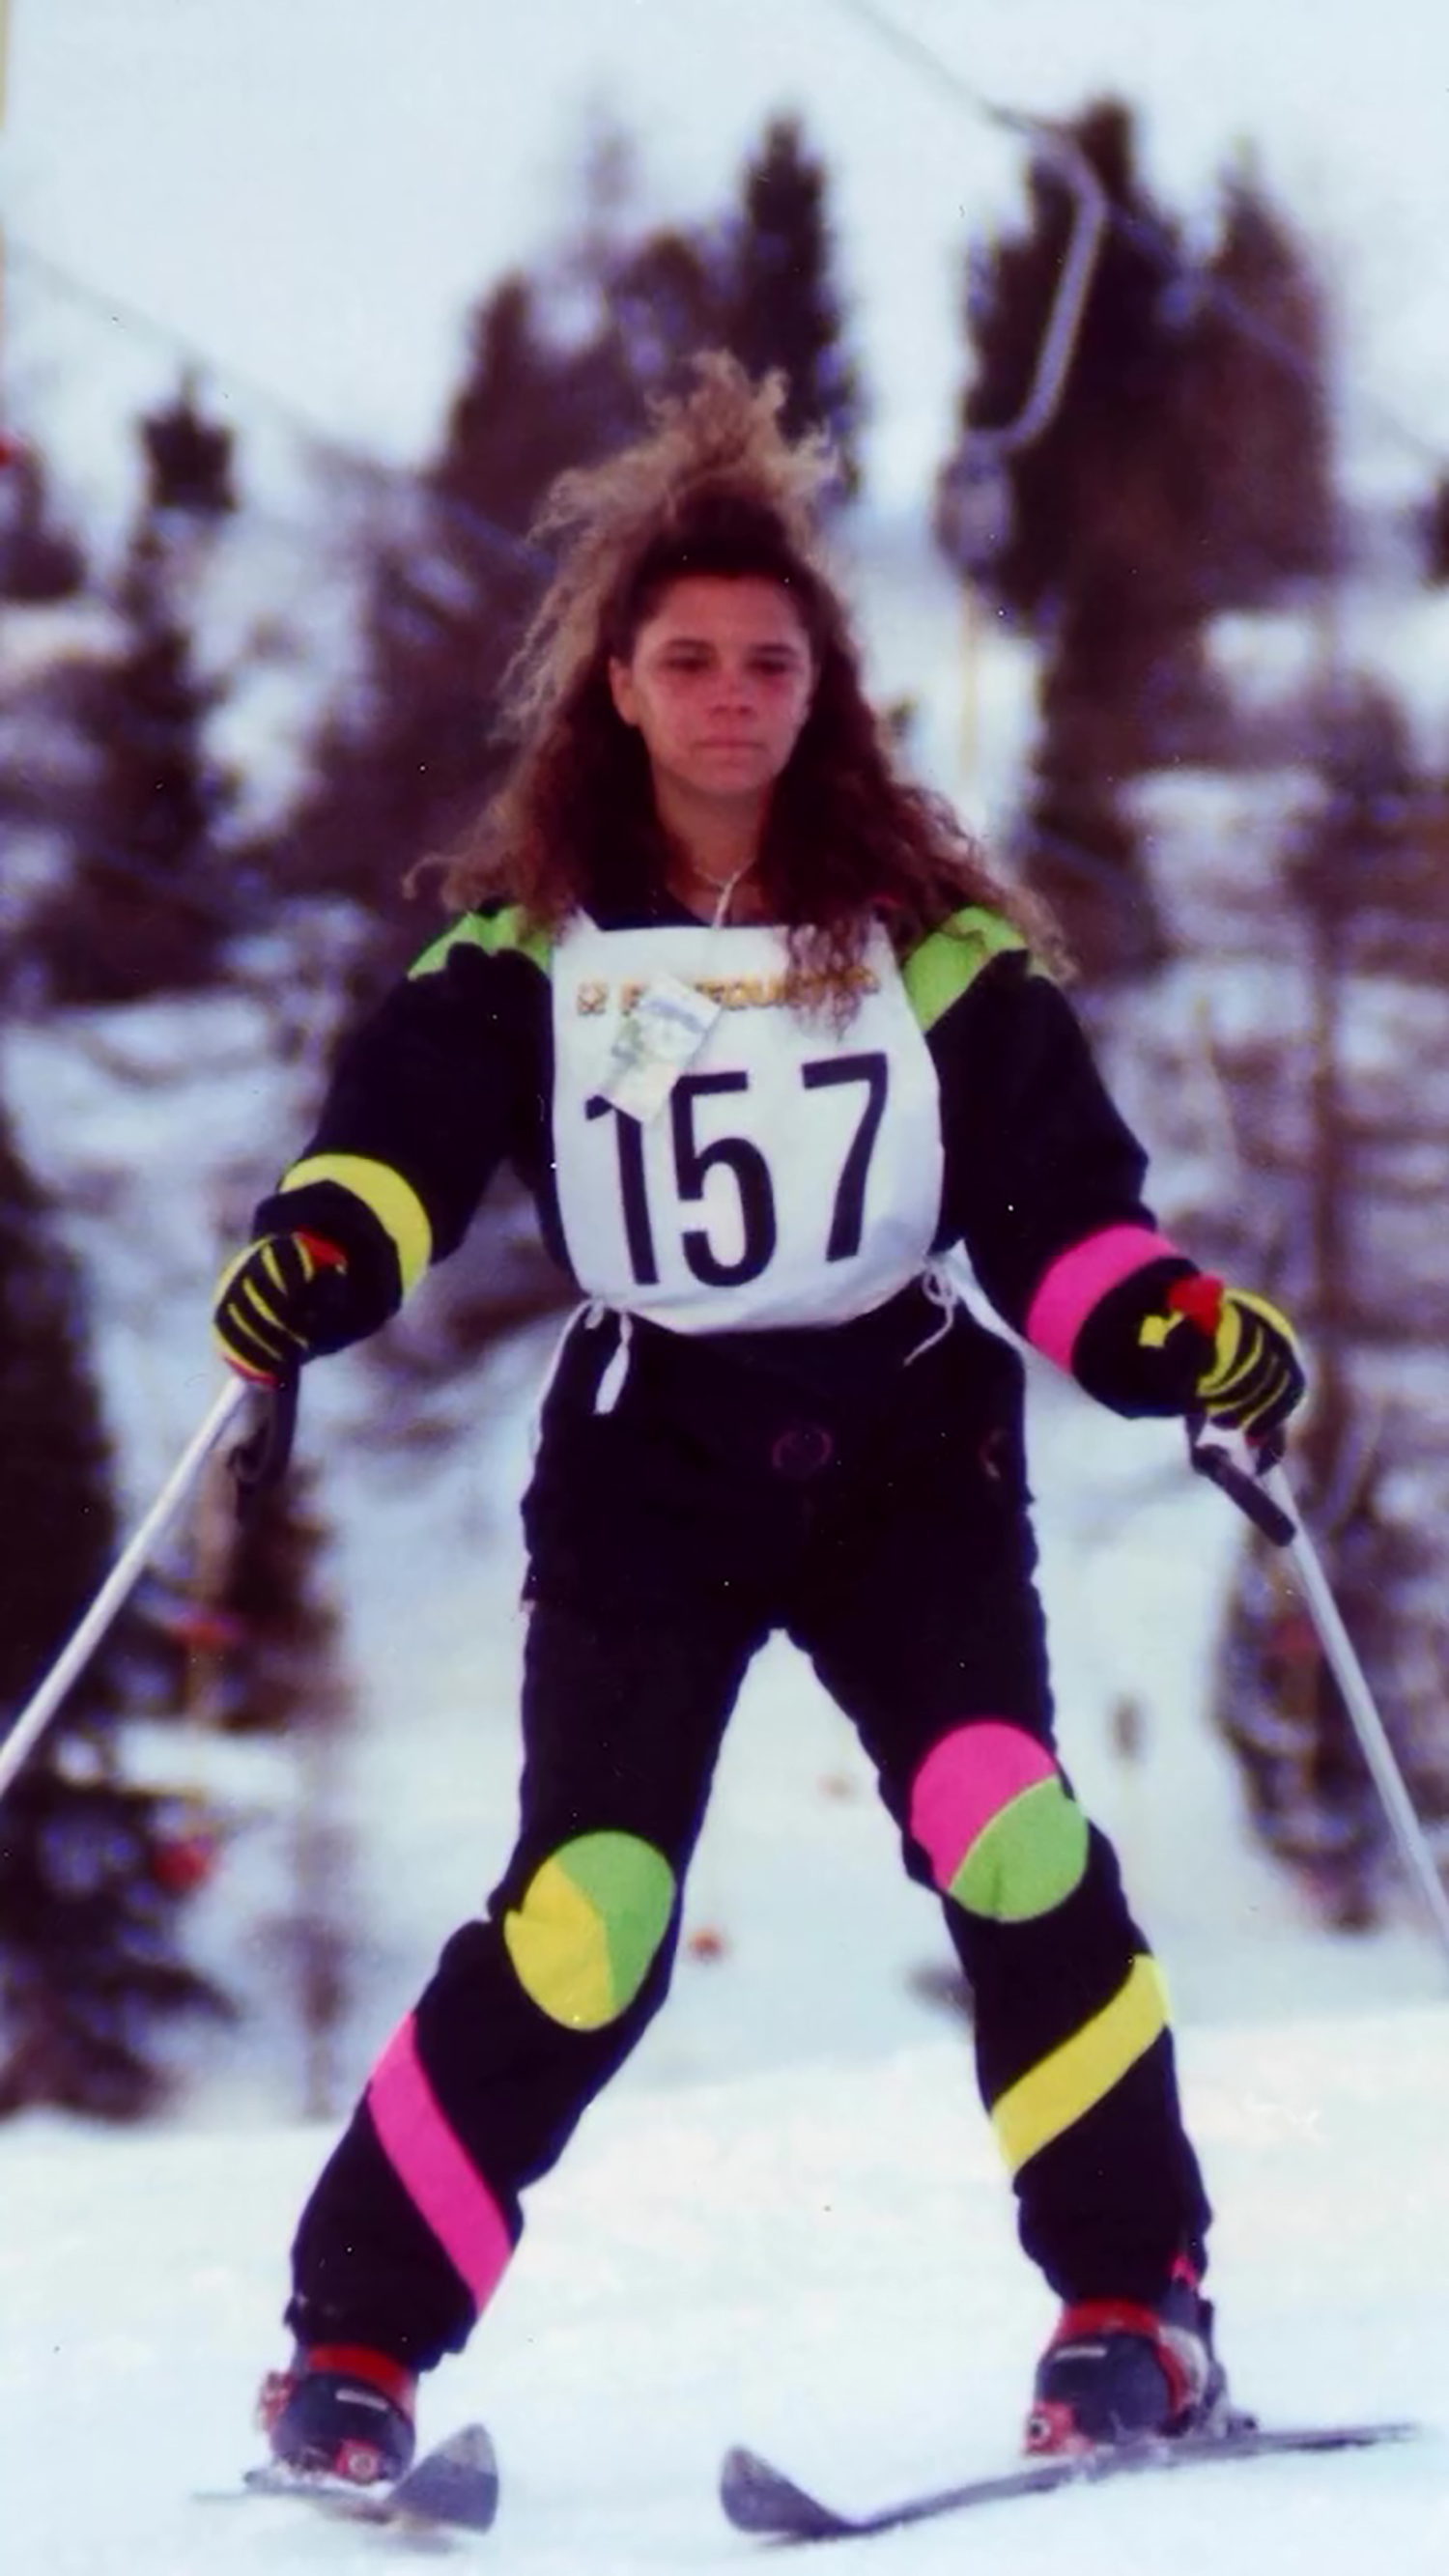 A young Victoria on the slopes